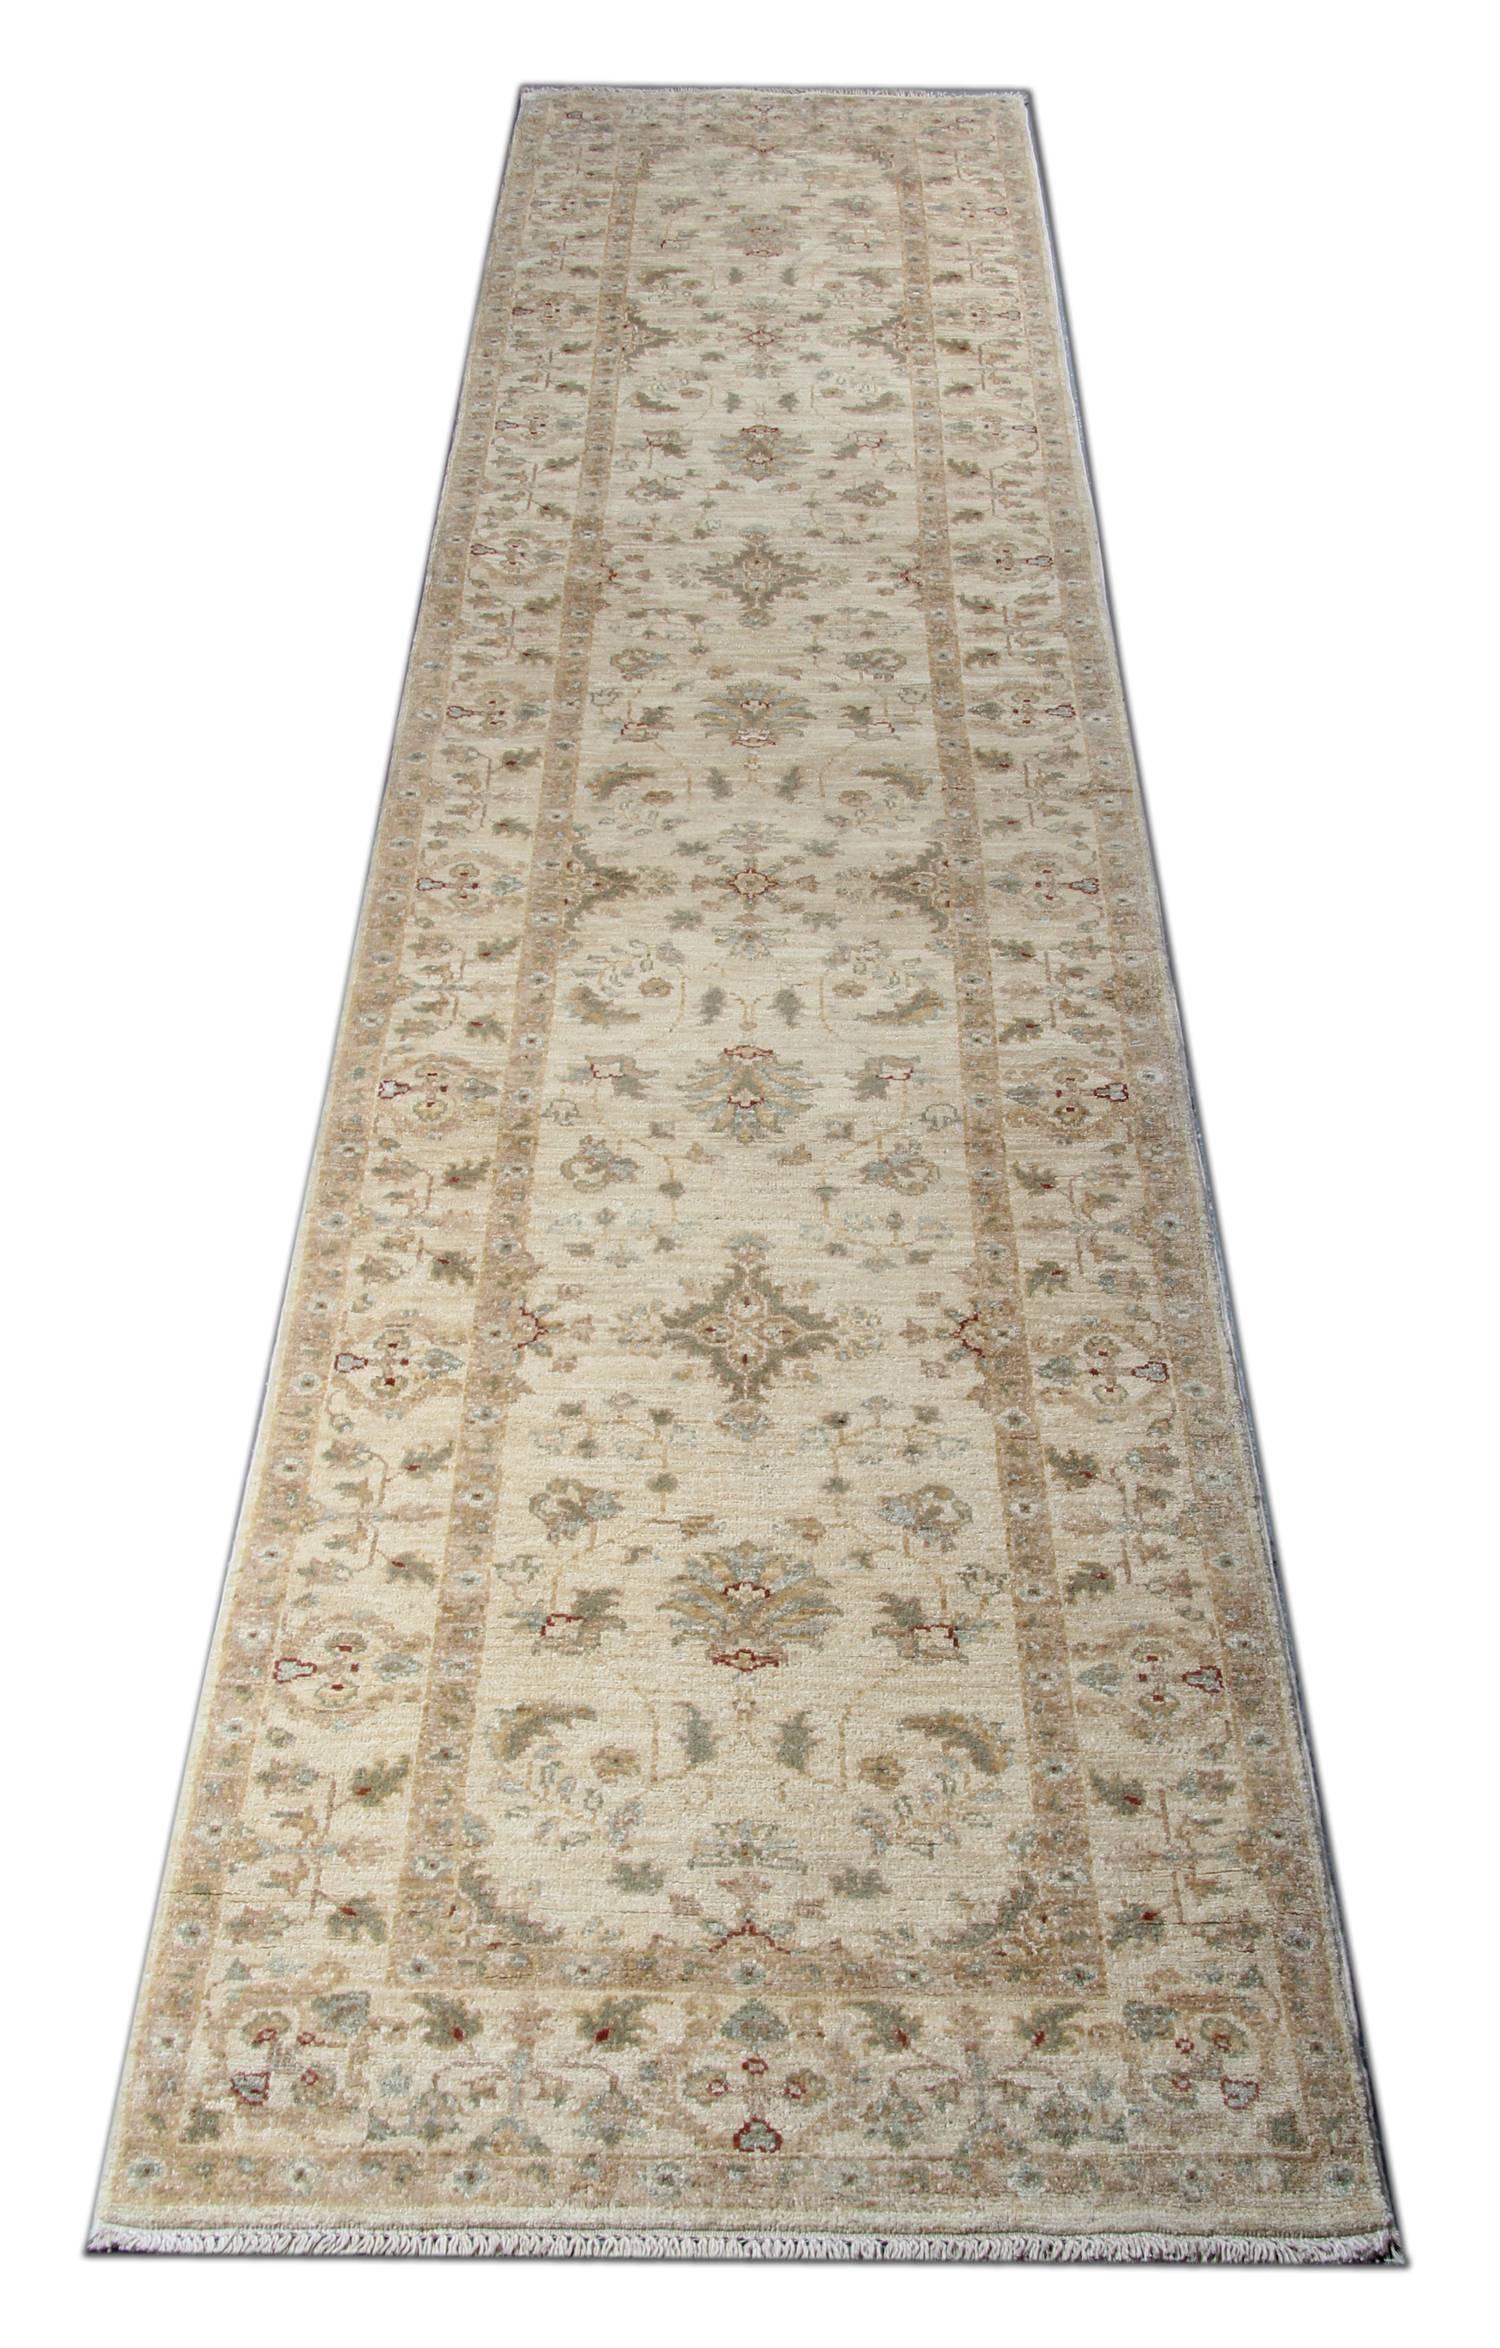 This modern Ziegler runner rug features a traditional Sultanabad design. Woven on a loom in Afghanistan by master weavers. Woven with the finest hand-spun wool, which has been dyed using traditional organic vegetable dying techniques. The design